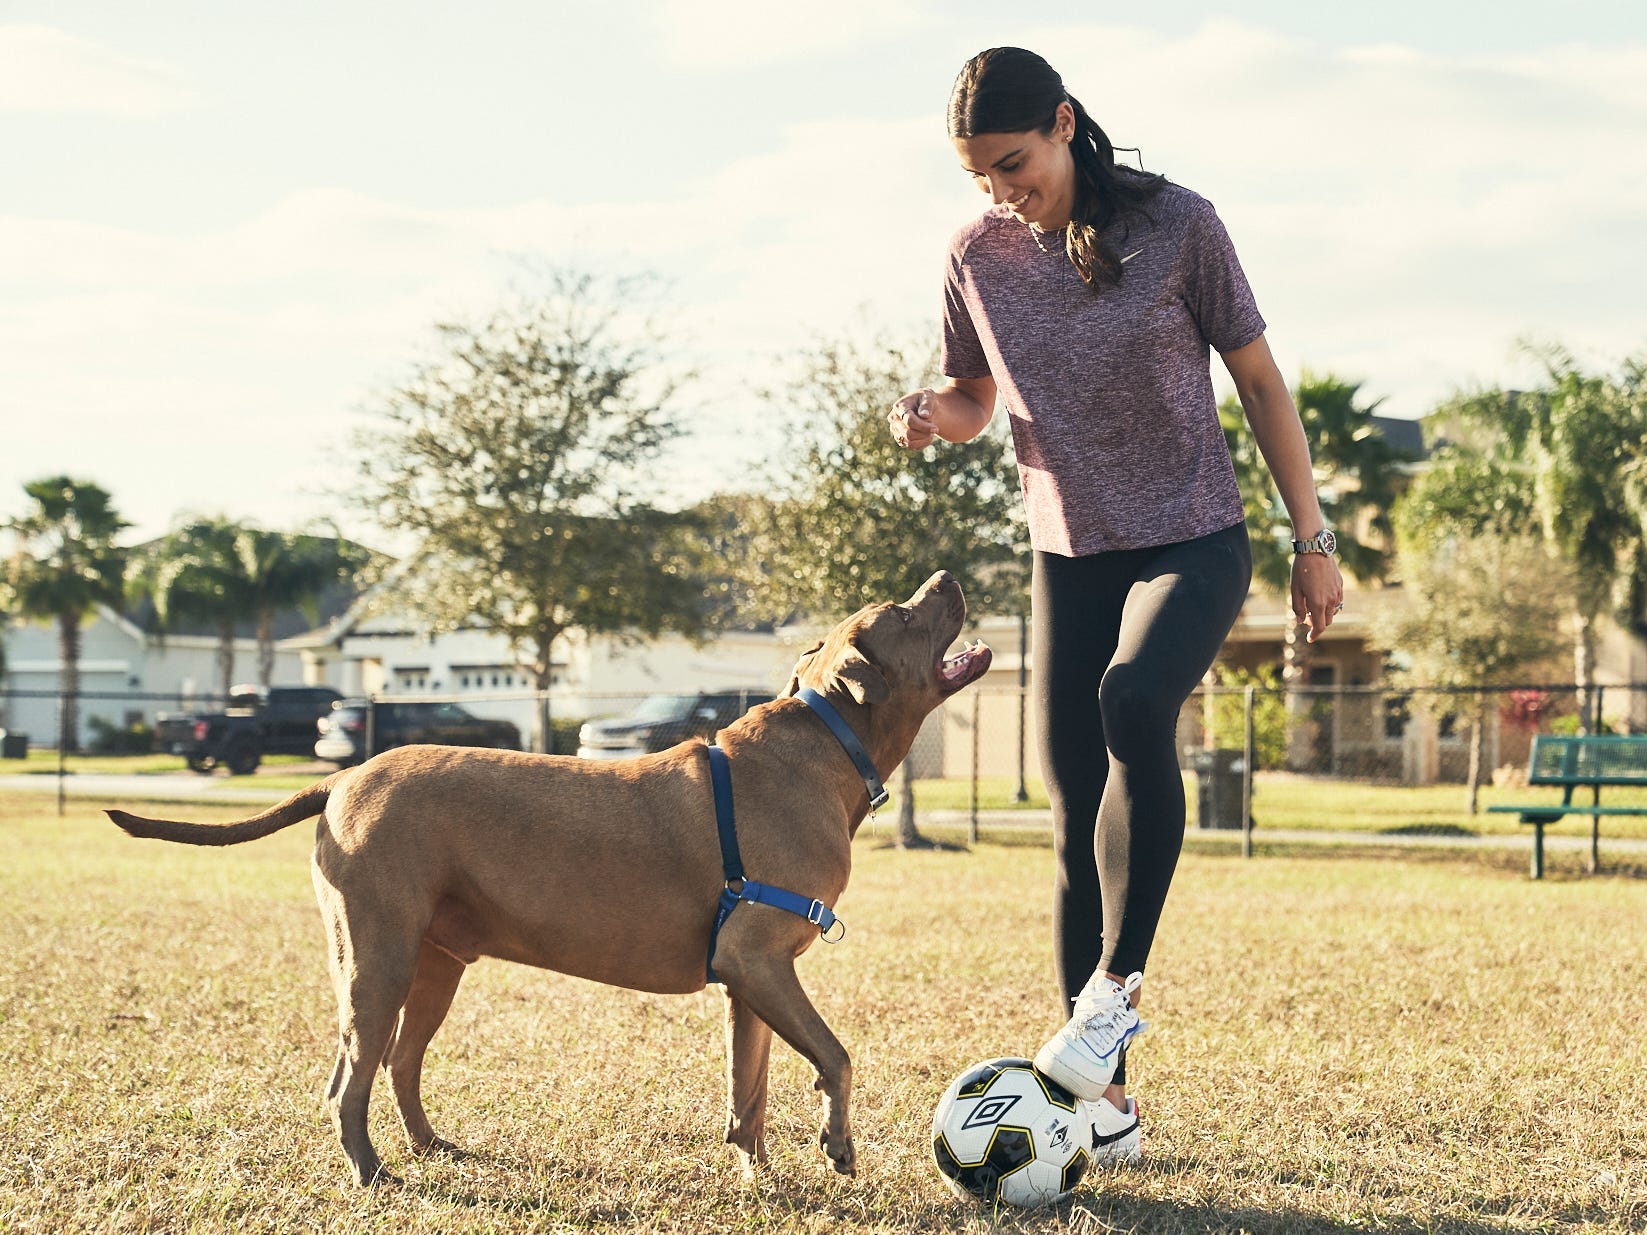 Alex Morgan plays soccer with her dog, Blue.